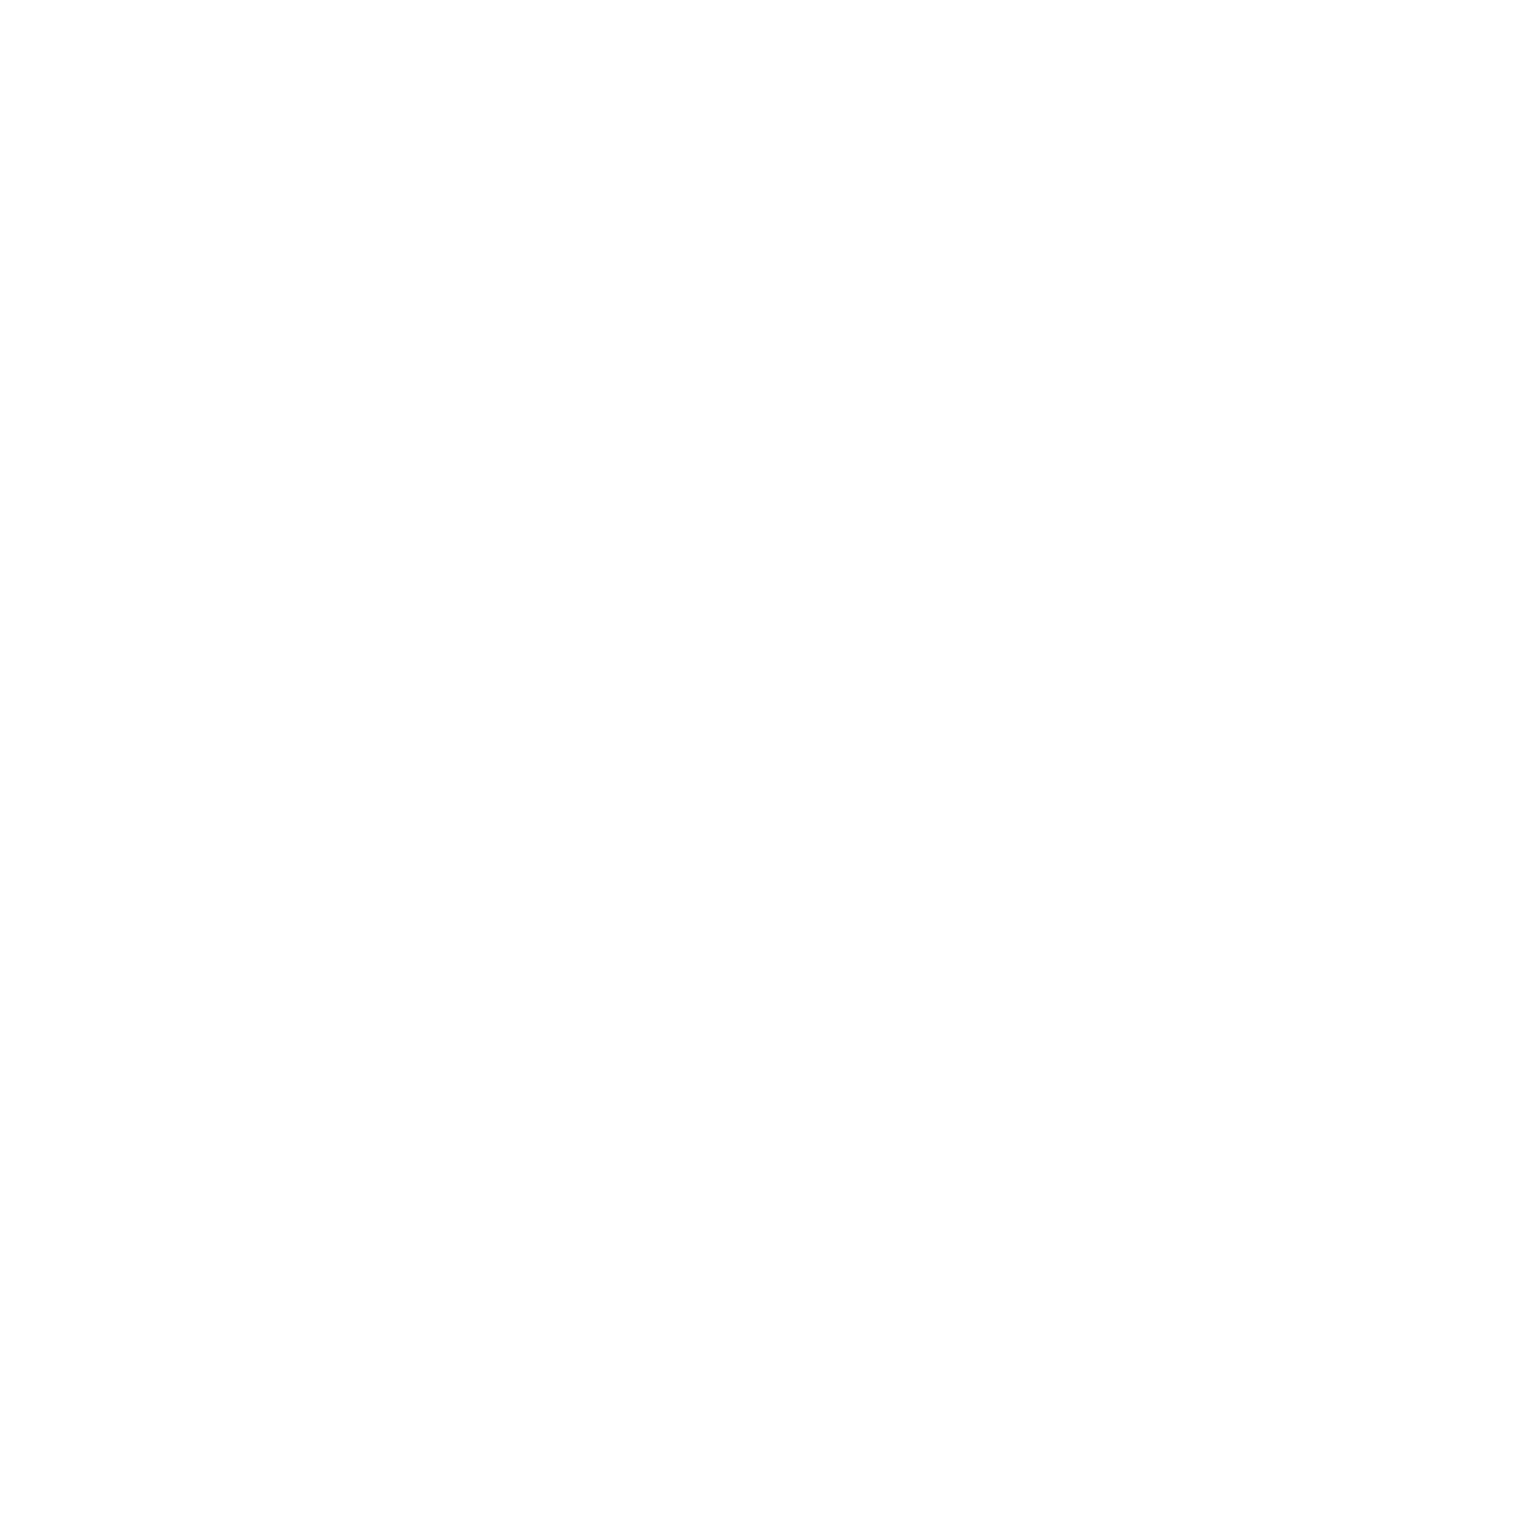 230 Years rosette icon